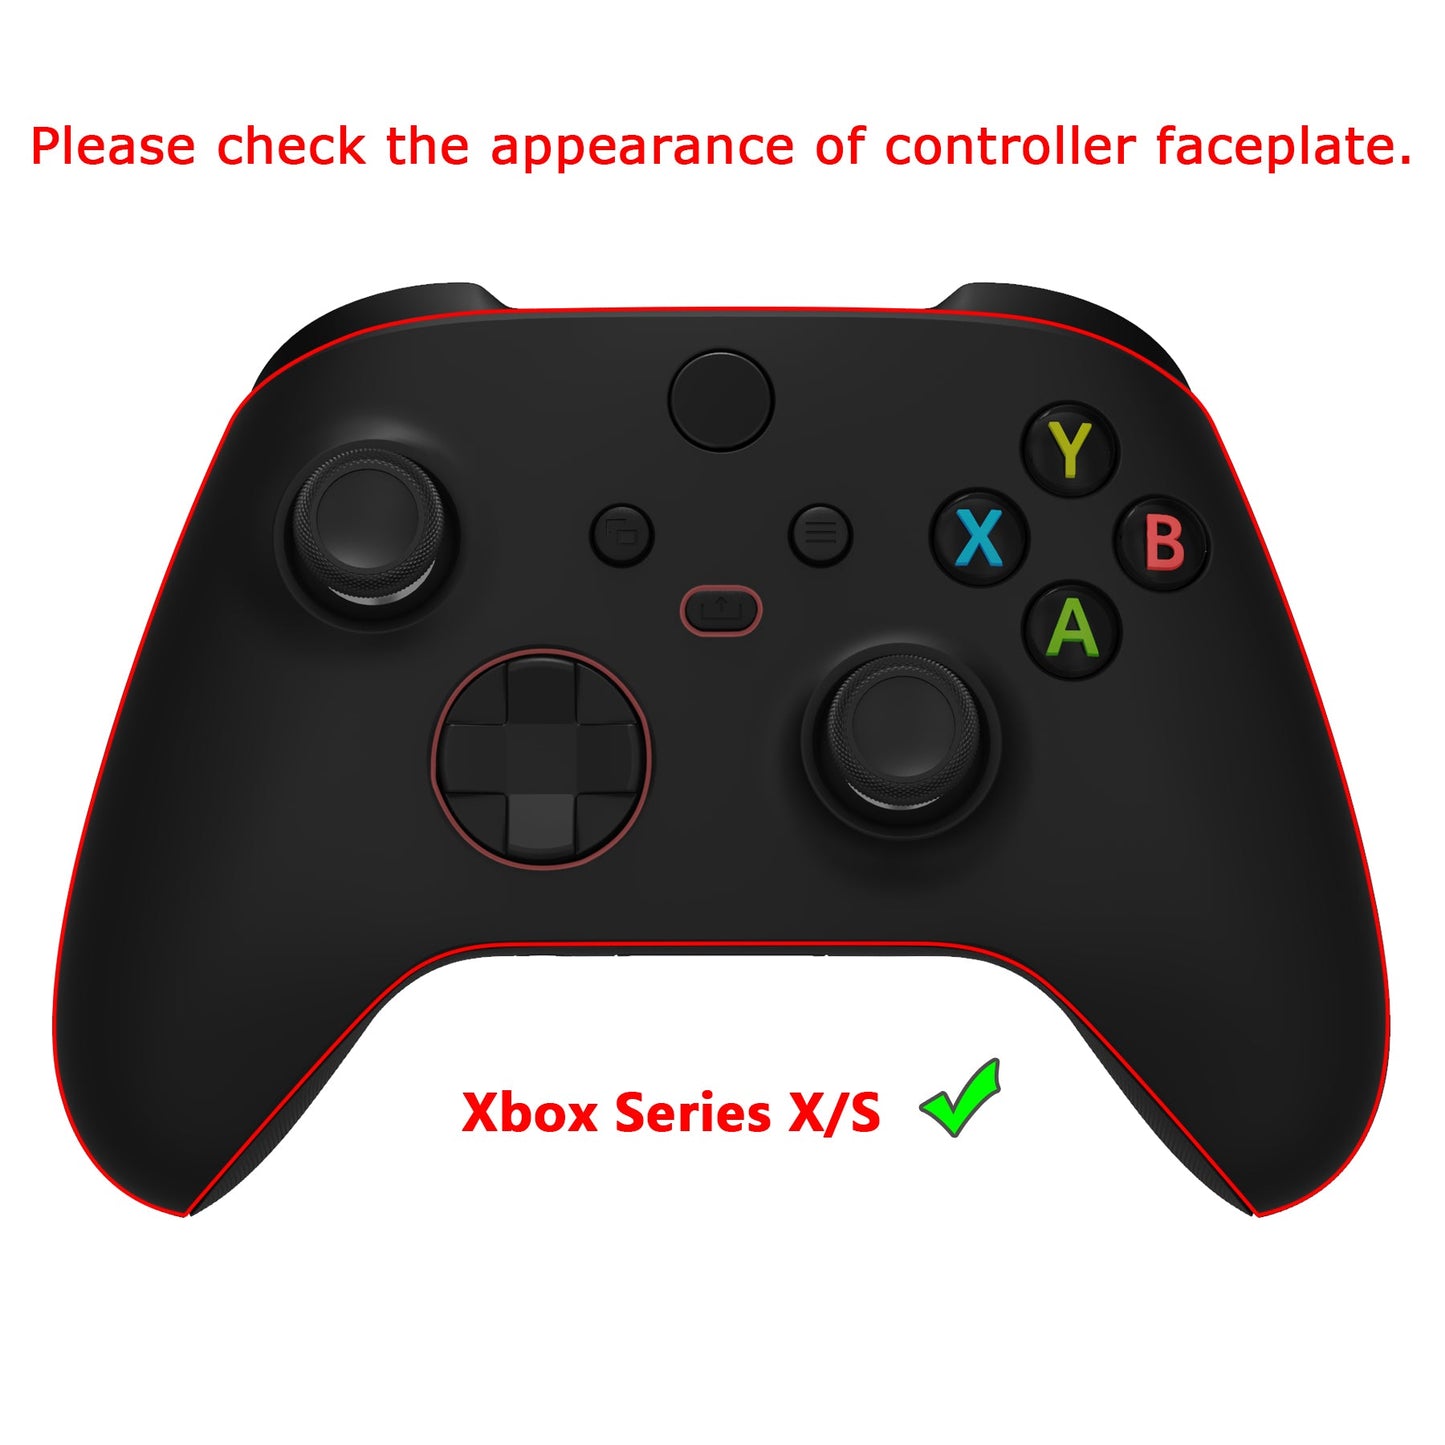 eXtremeRate Retail Replacement Front Housing Shell for Xbox Series X Controller, Clear Red Custom Cover Faceplate for Xbox Series S Controller - Controller NOT Included - FX3M502